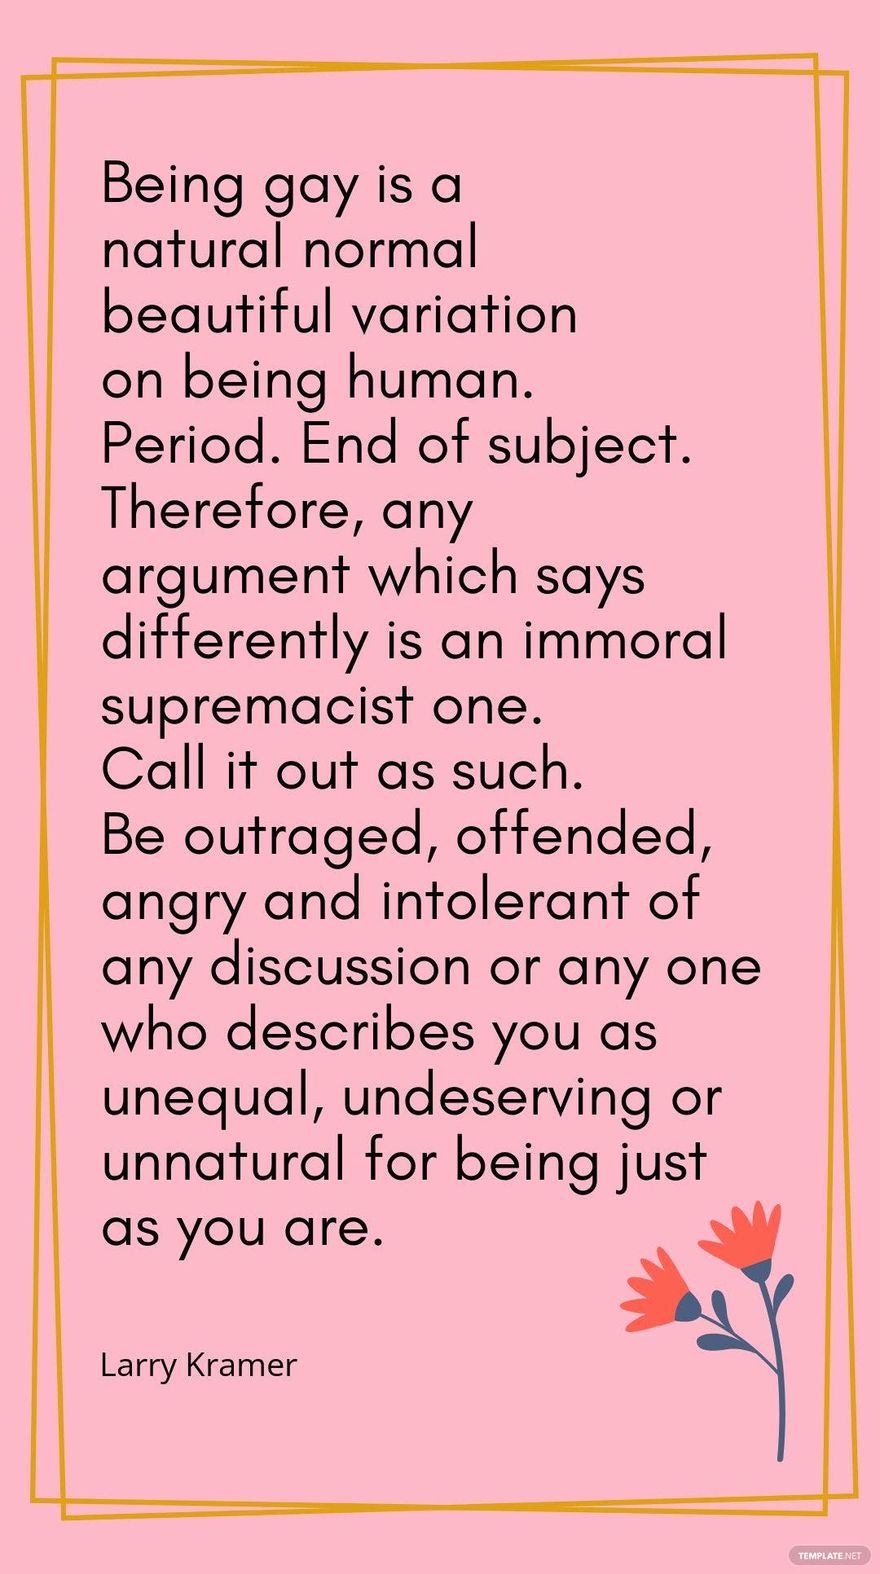 Larry Kramer - Being gay is a natural normal beautiful variation on being human. Period. End of subject. Therefore, any argument which says differently is an immoral supremacist one. Call it out as su